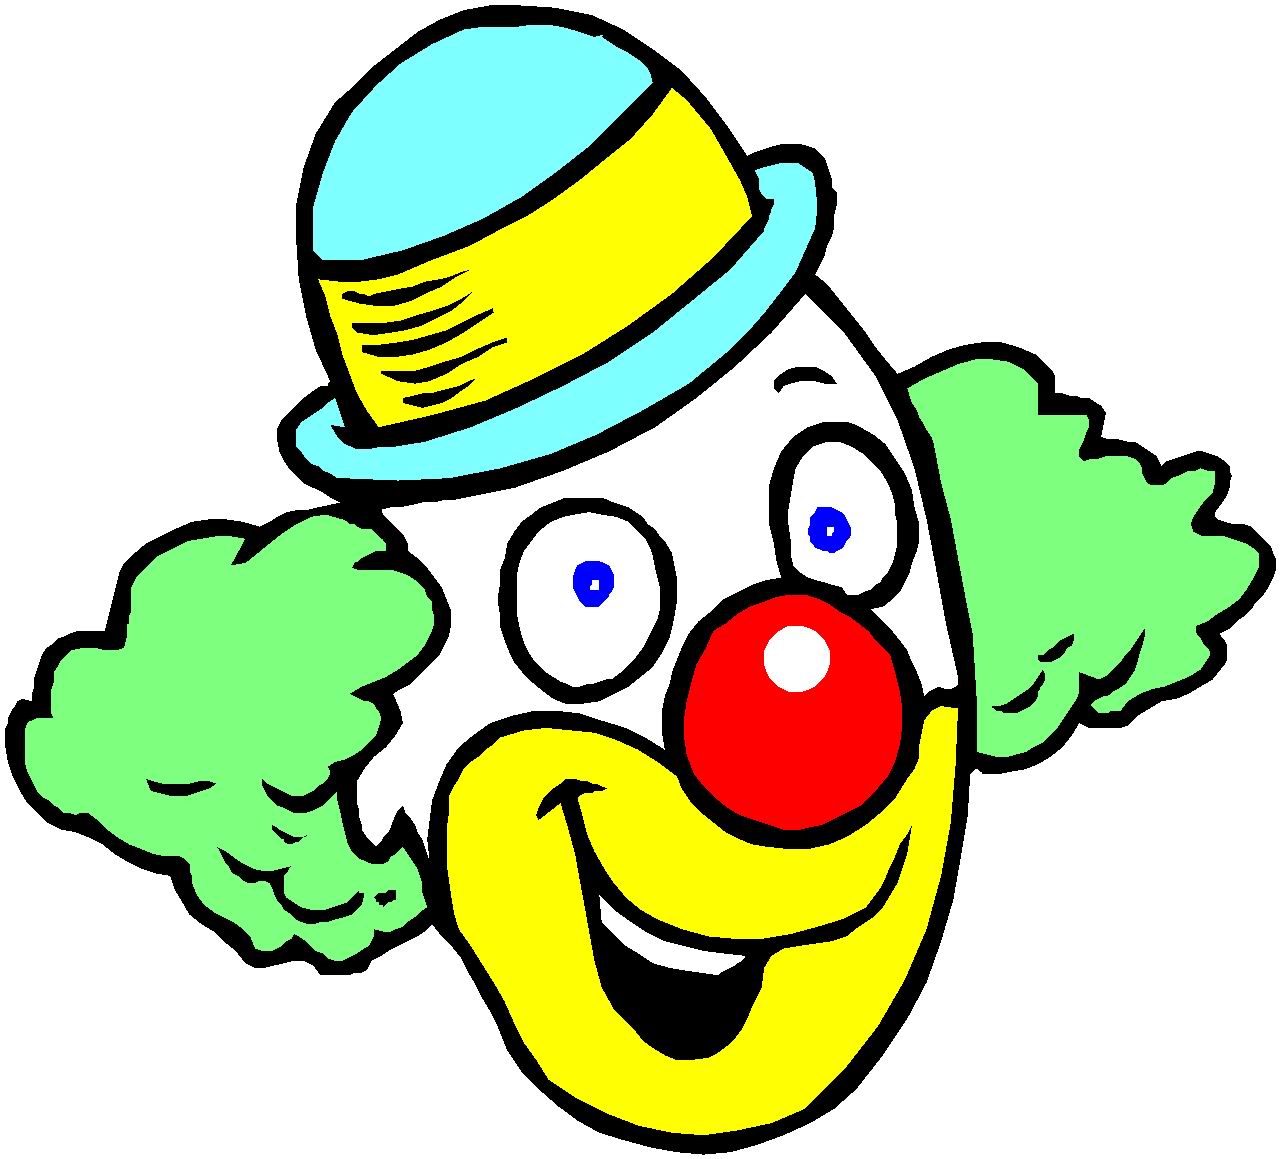 Free Clown Face, Download Free Clip Art, Free Clip Art on